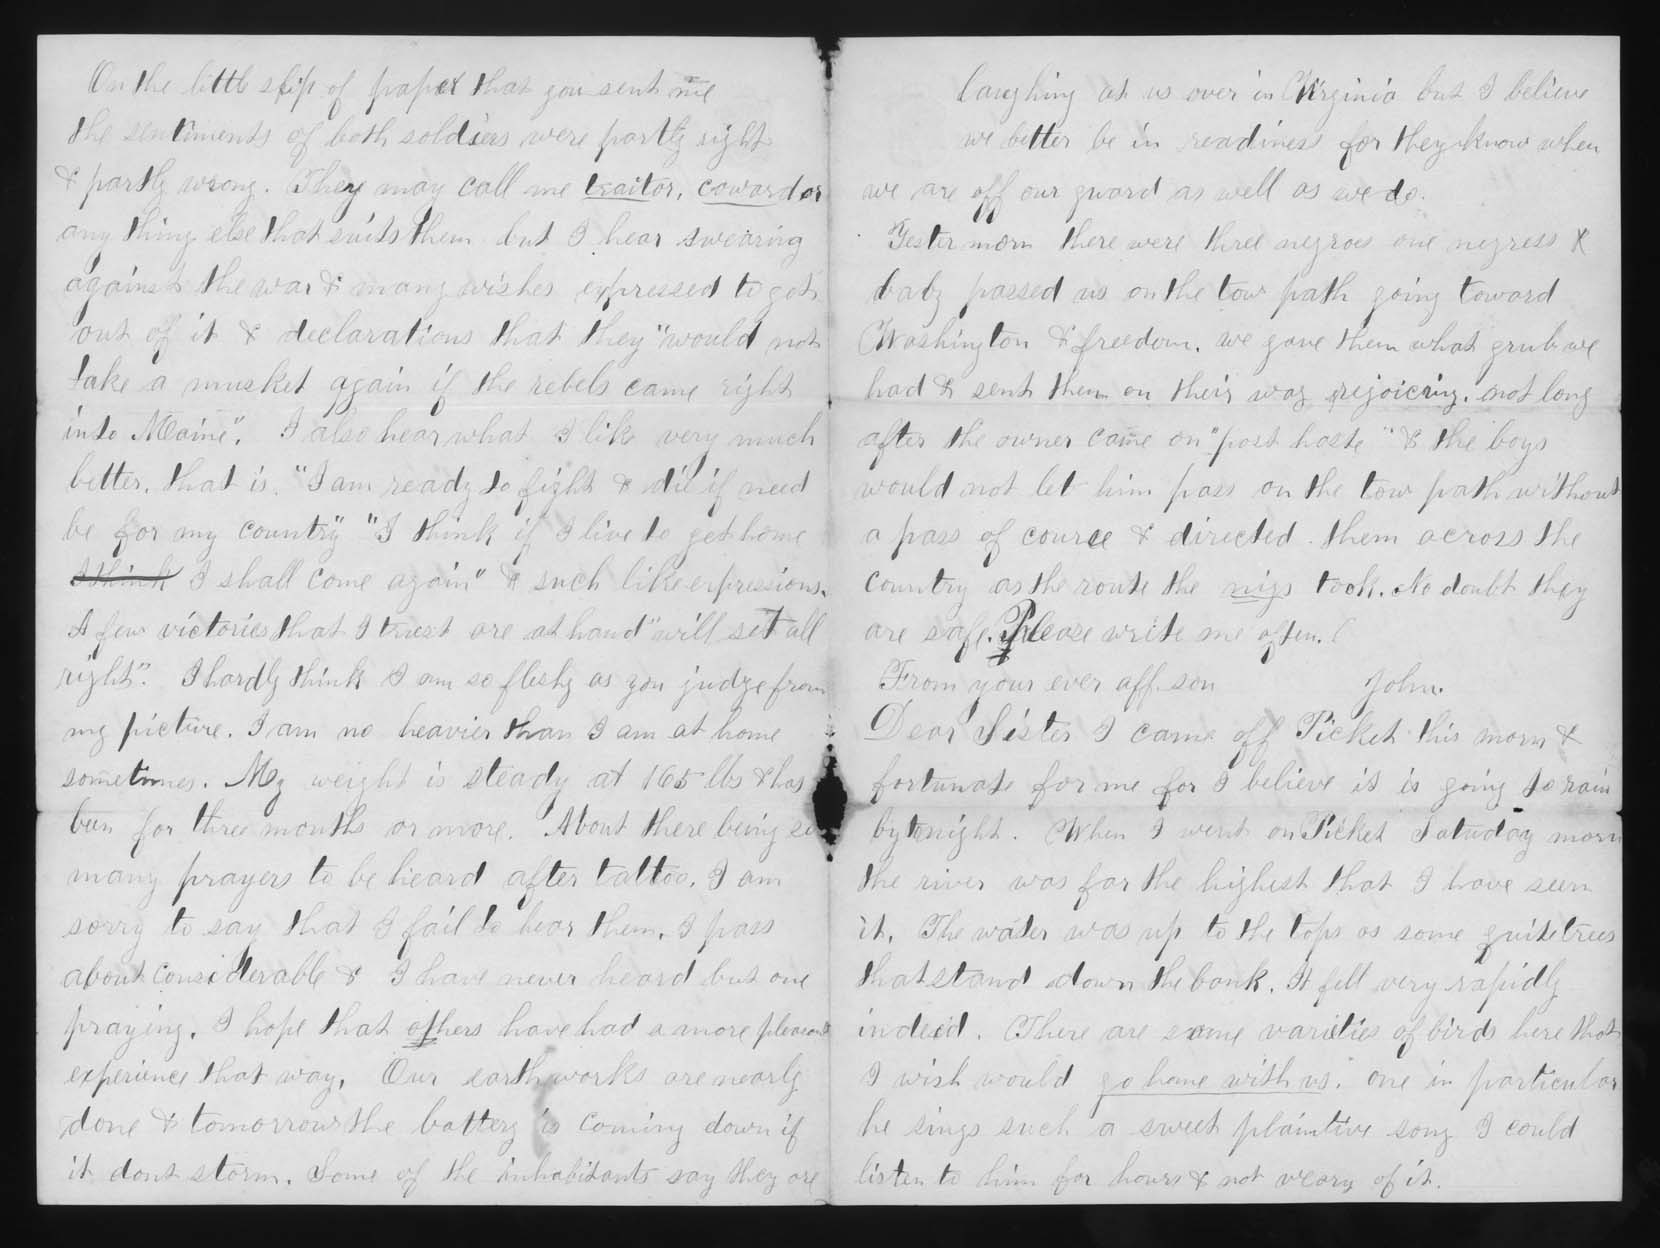 Letter, John M. Jackson, Camp near Edwards Ferry, Maryland, to Betsey Mower Jackson and Delora Jackson, Pages 2-3